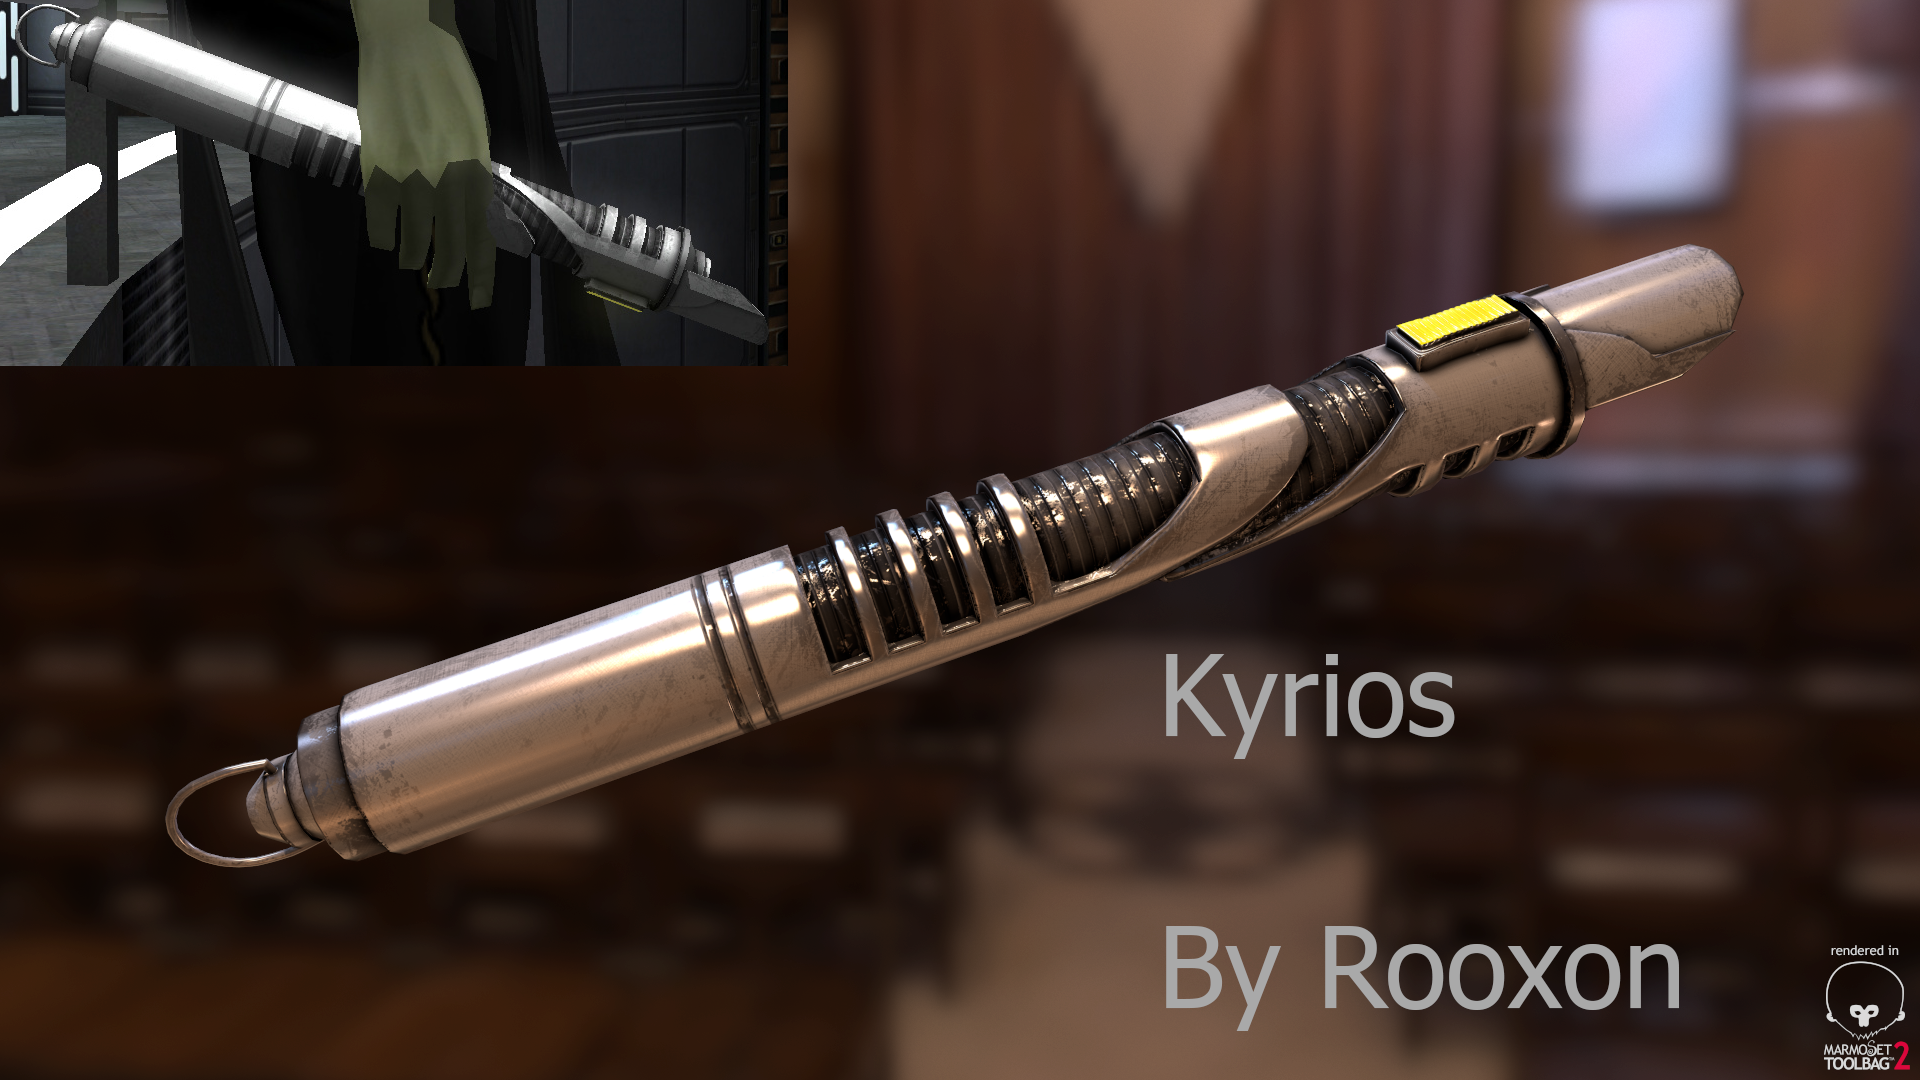 More information about "Kyrios hilt"